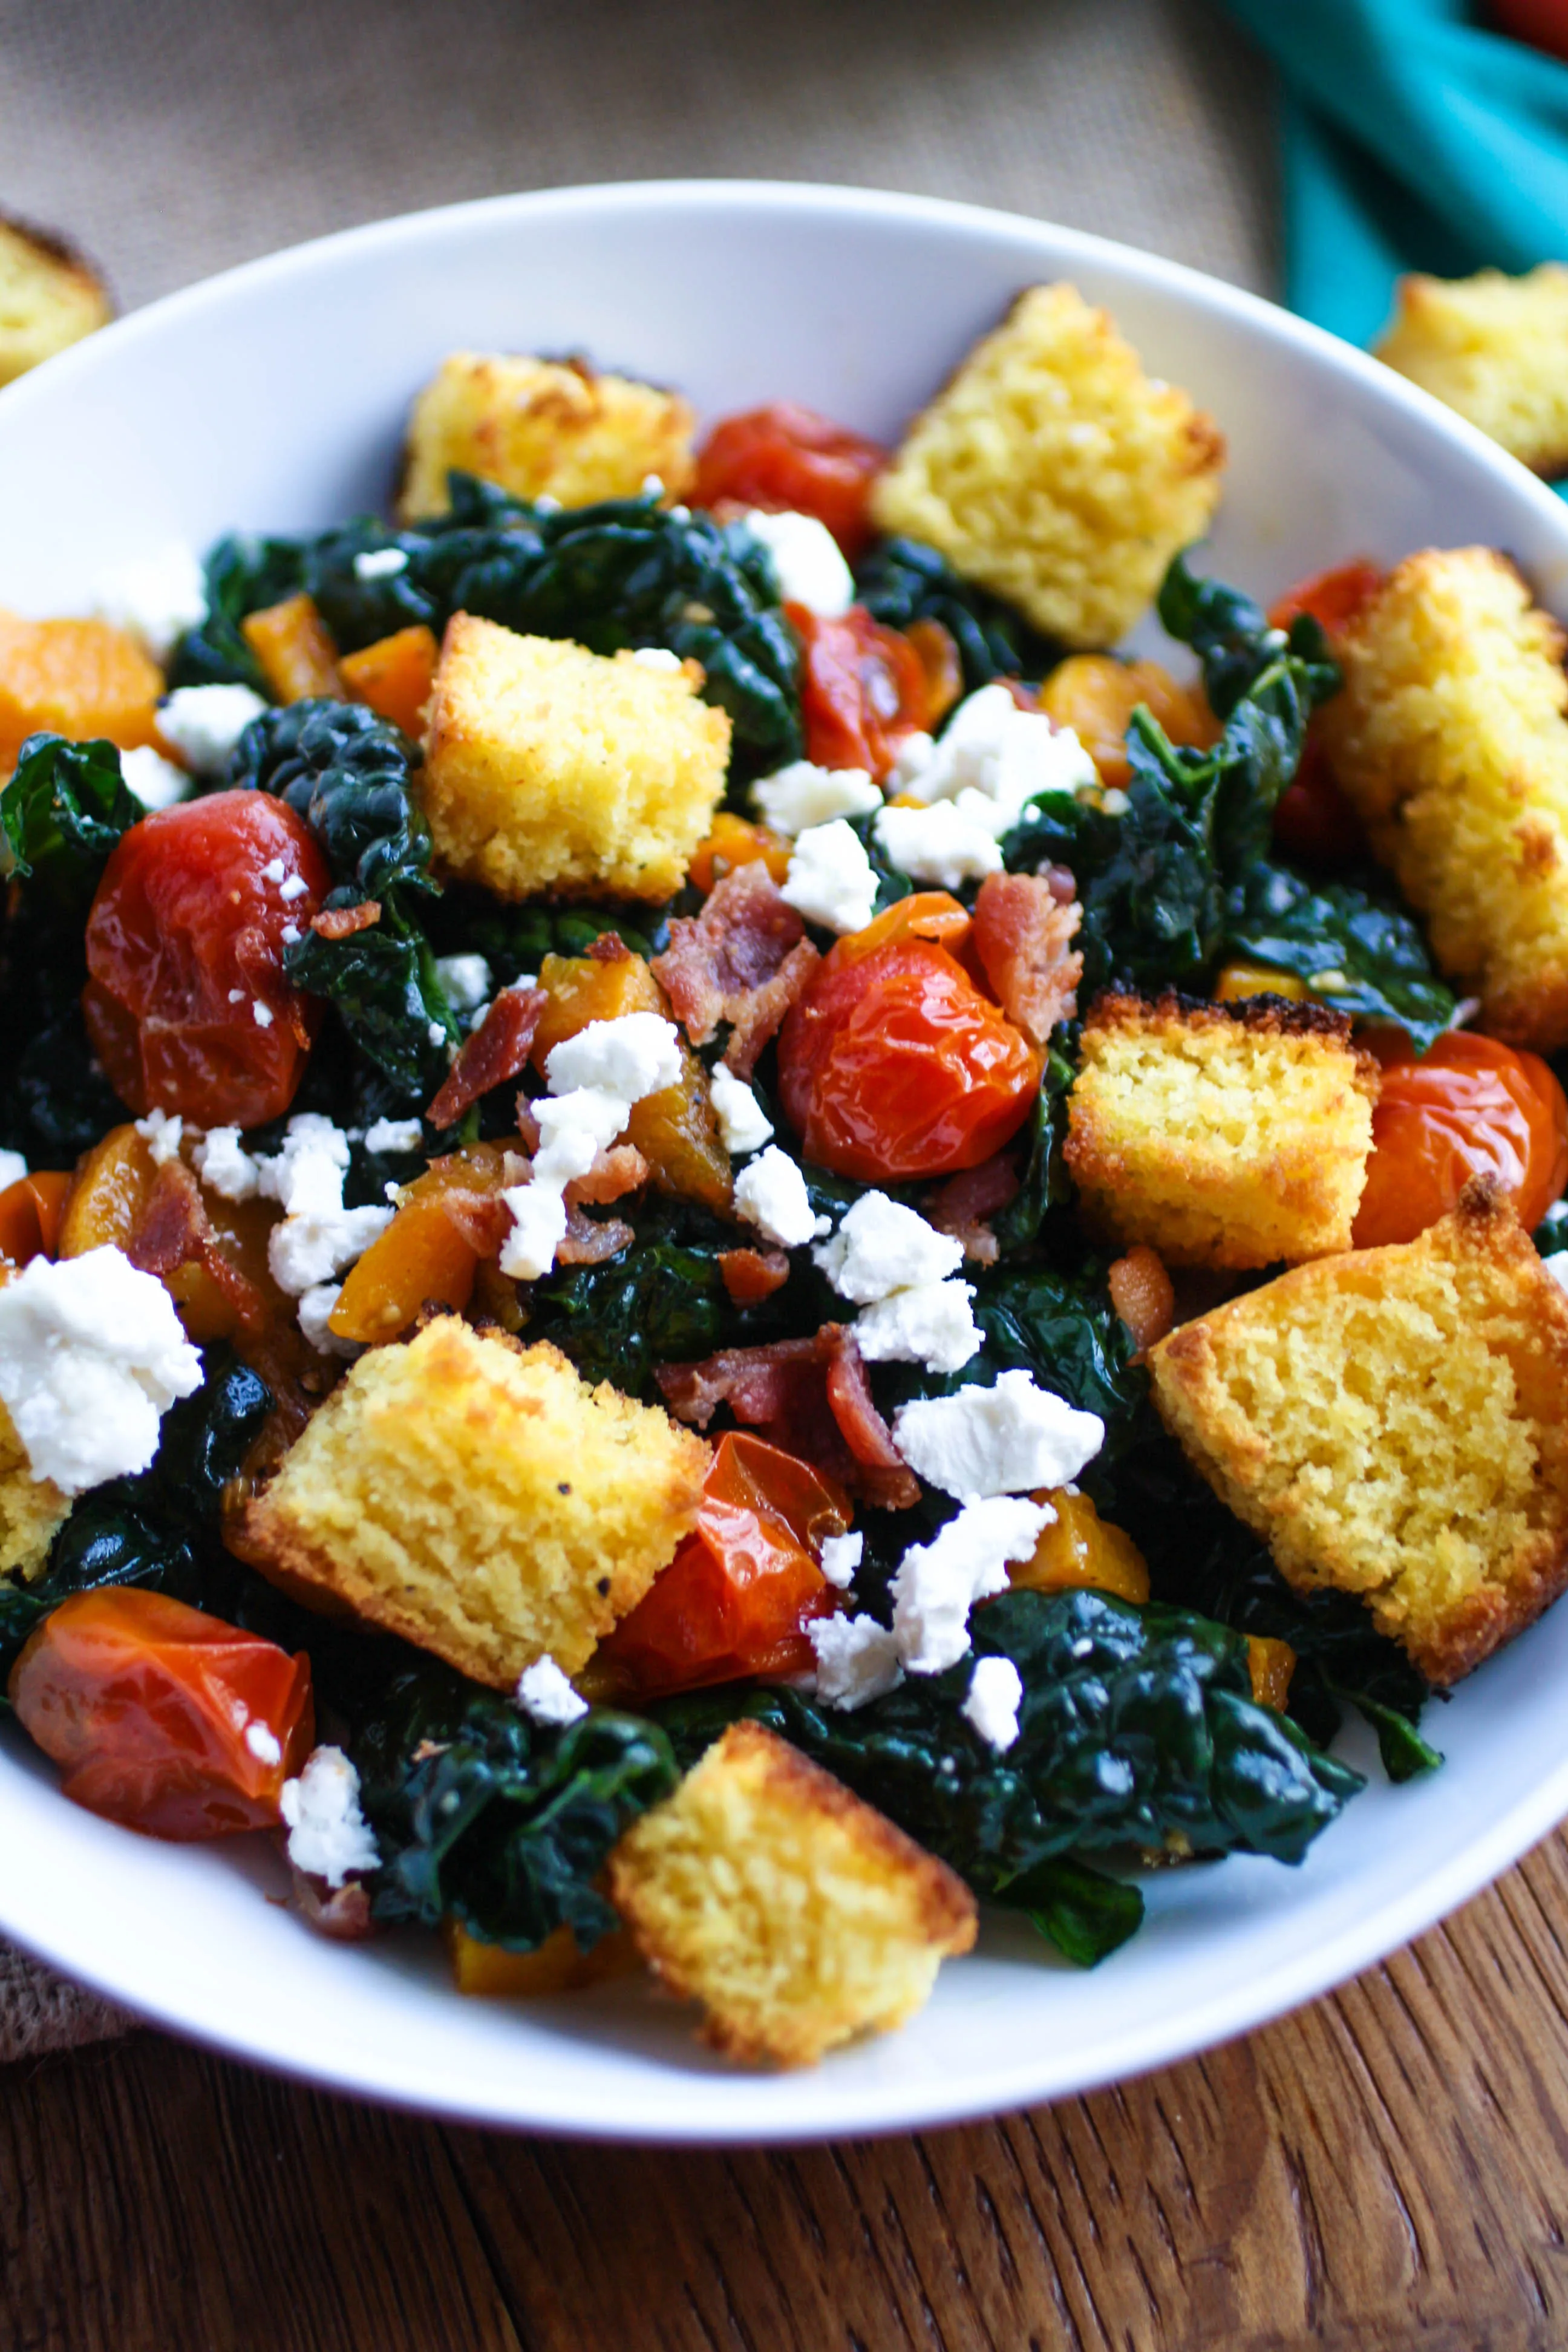 Kale and Cornbread Crouton Salad makes a fabulous day-after Thanksgiving dish. You'll love using up your Thanksgiving leftovers to make this salad -- especially that cornbread!